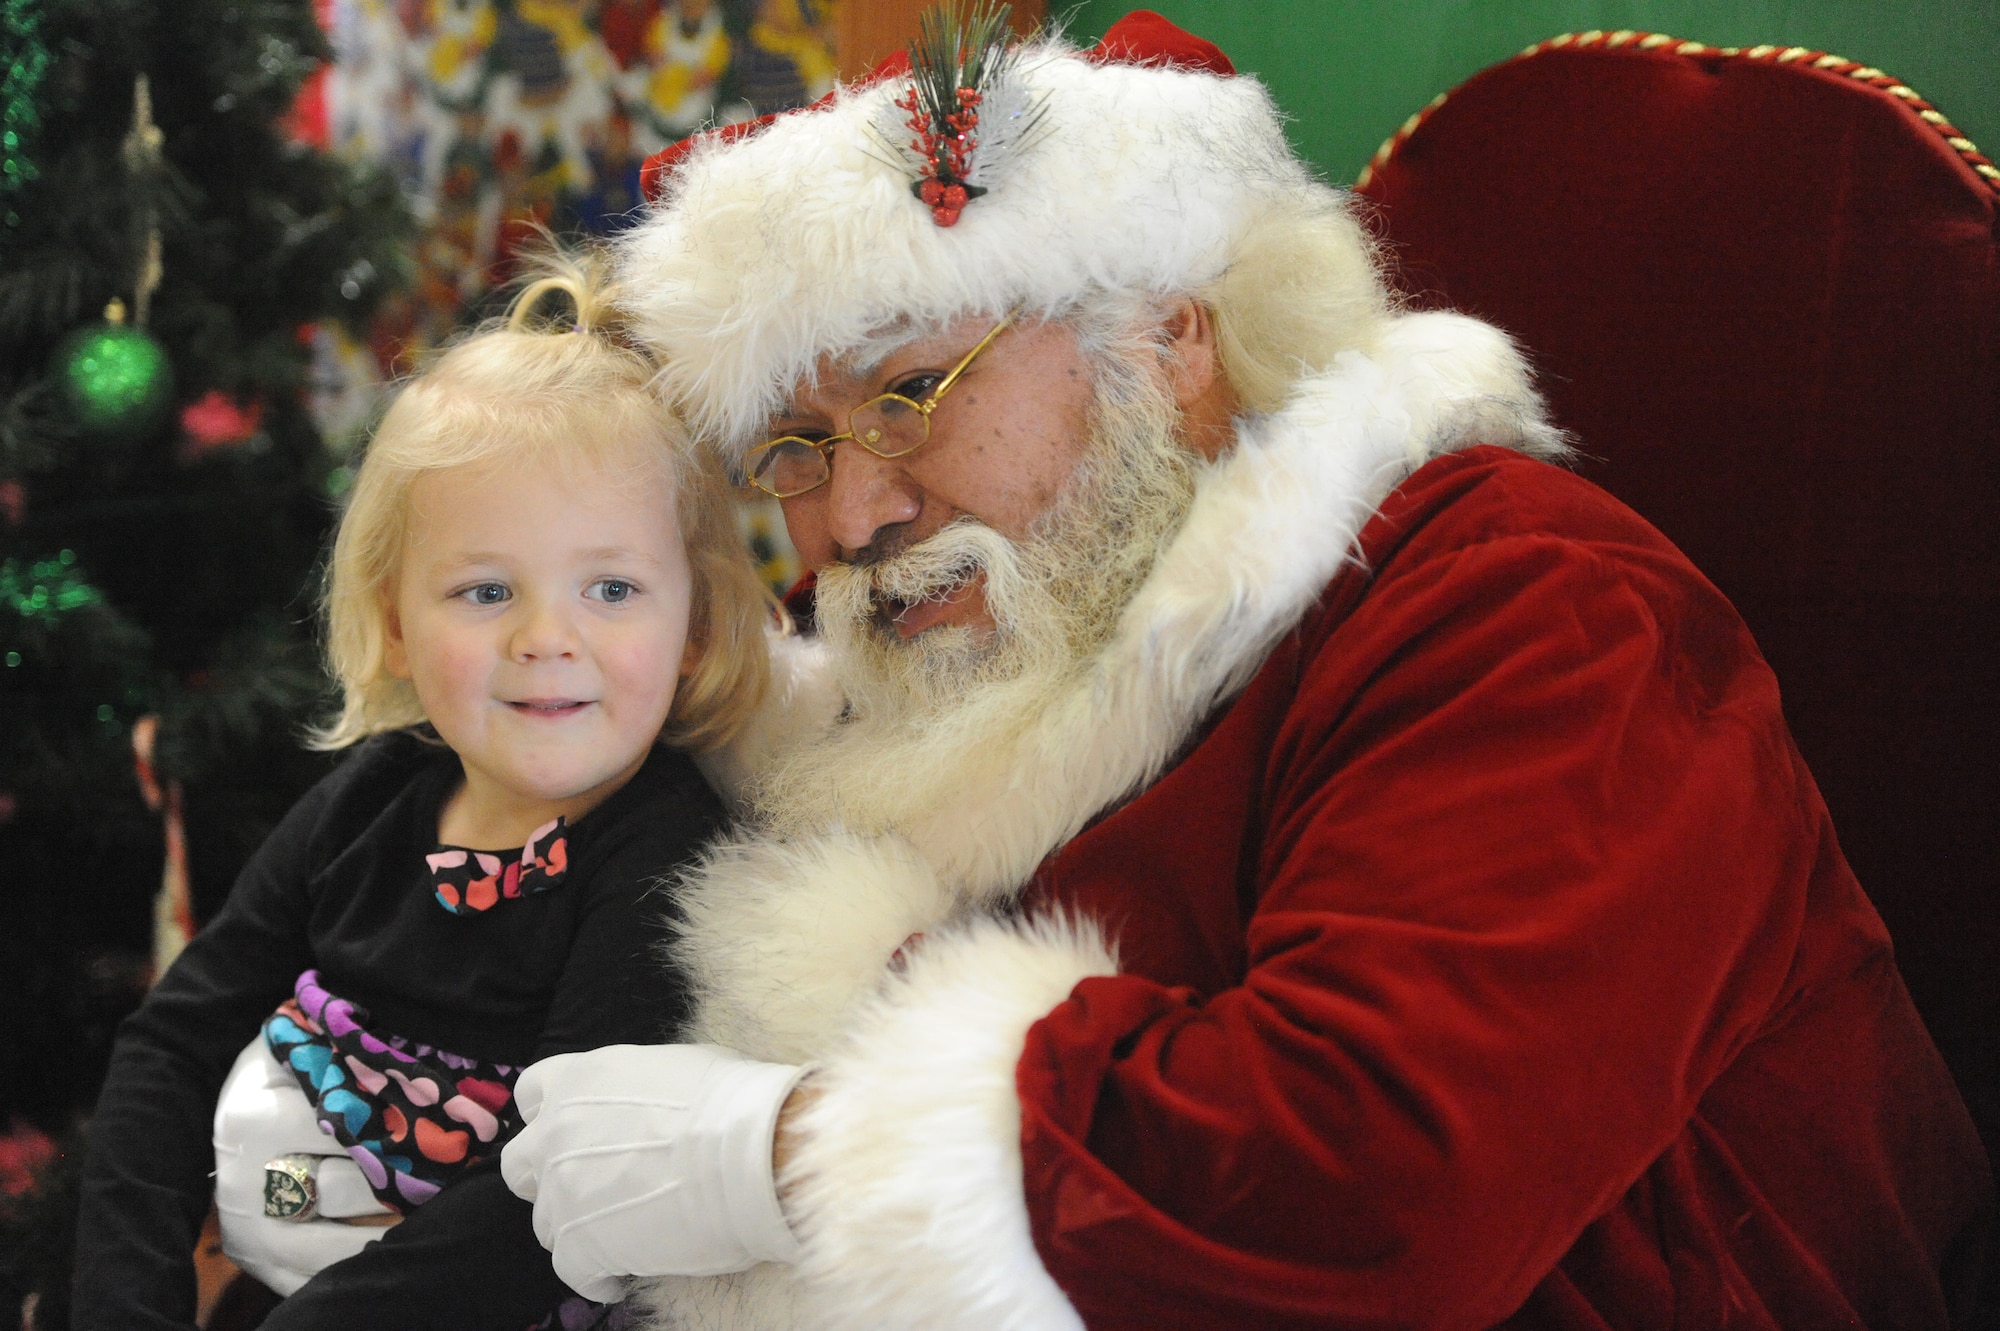 Santa Claus visits with a young child at Operation Holiday Cheer, one of Kirtland's biggest charitable events of the year. The event, hosted annually by the Kirtland Air Force Base Fire Department, delivered more than 800 new, high-quality toys to children Dec. 14.  More than 1,700 members of the community received a full holiday meal, with turkey, enchiladas, posole, mashed potatoes and desserts. 